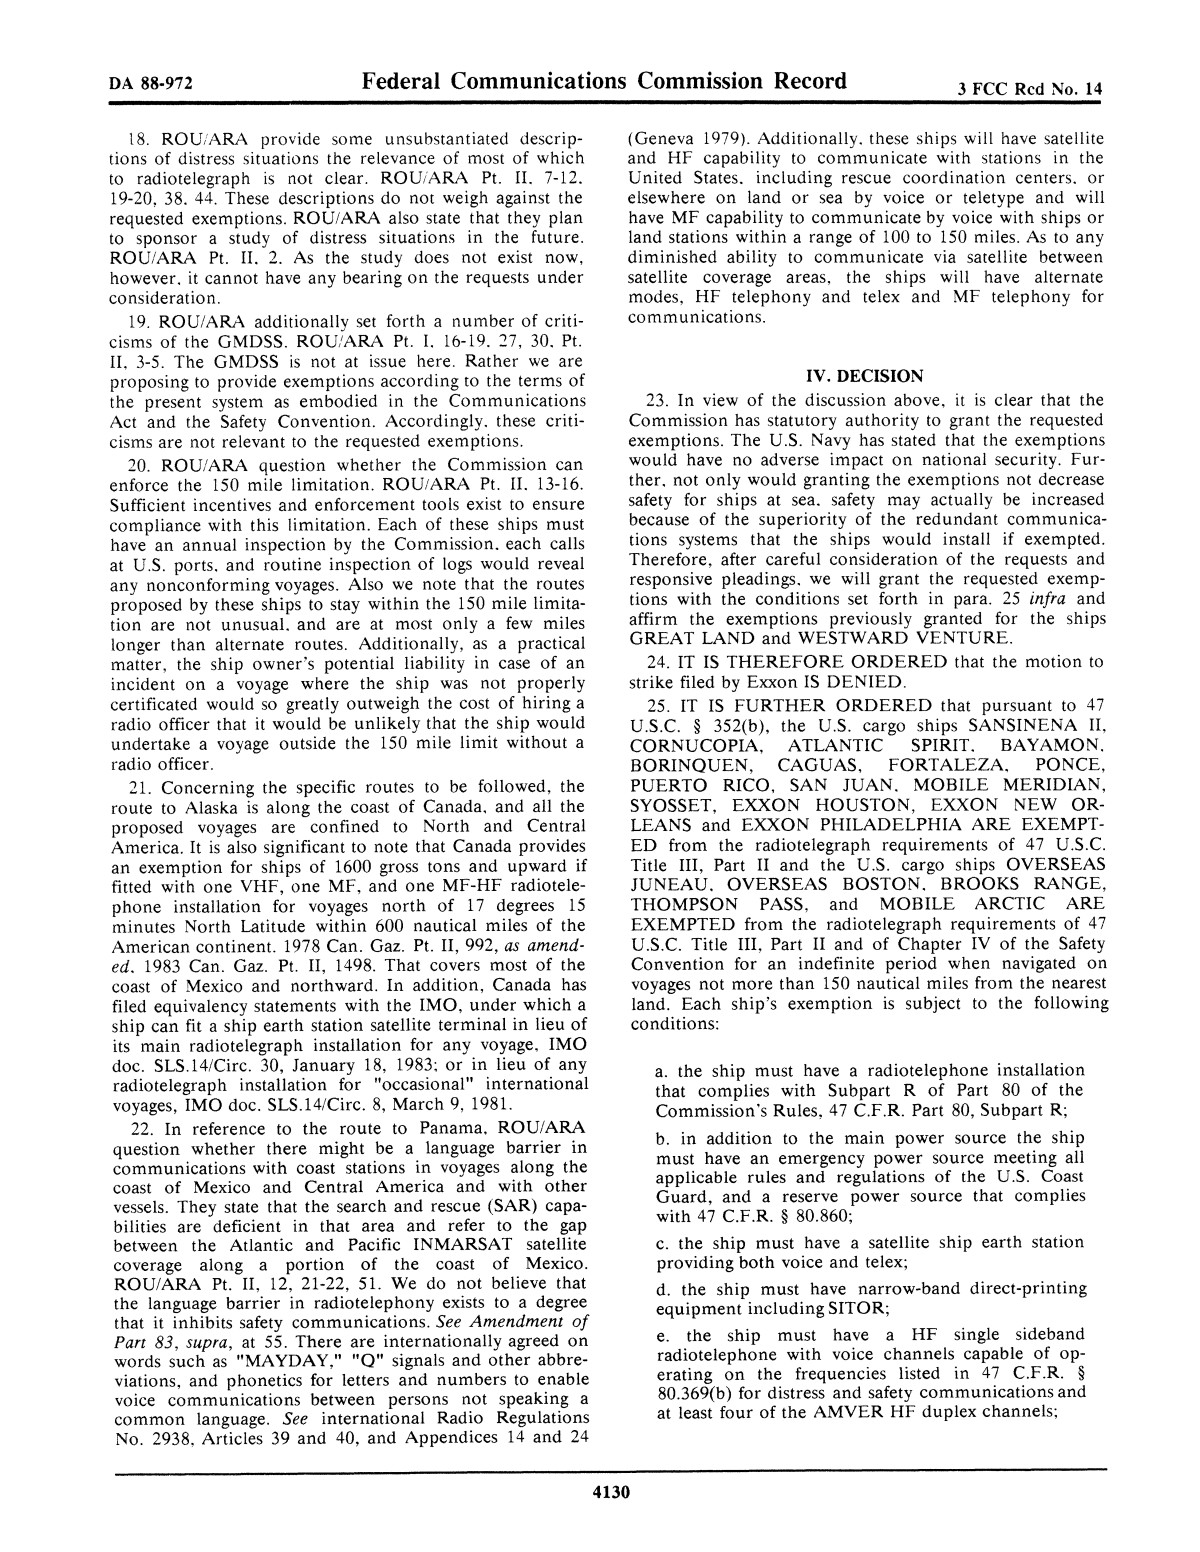 FCC Record, Volume 3, No. 14, Pages 4085 to 4354, July 5 - July 15, 1988
                                                
                                                    4130
                                                